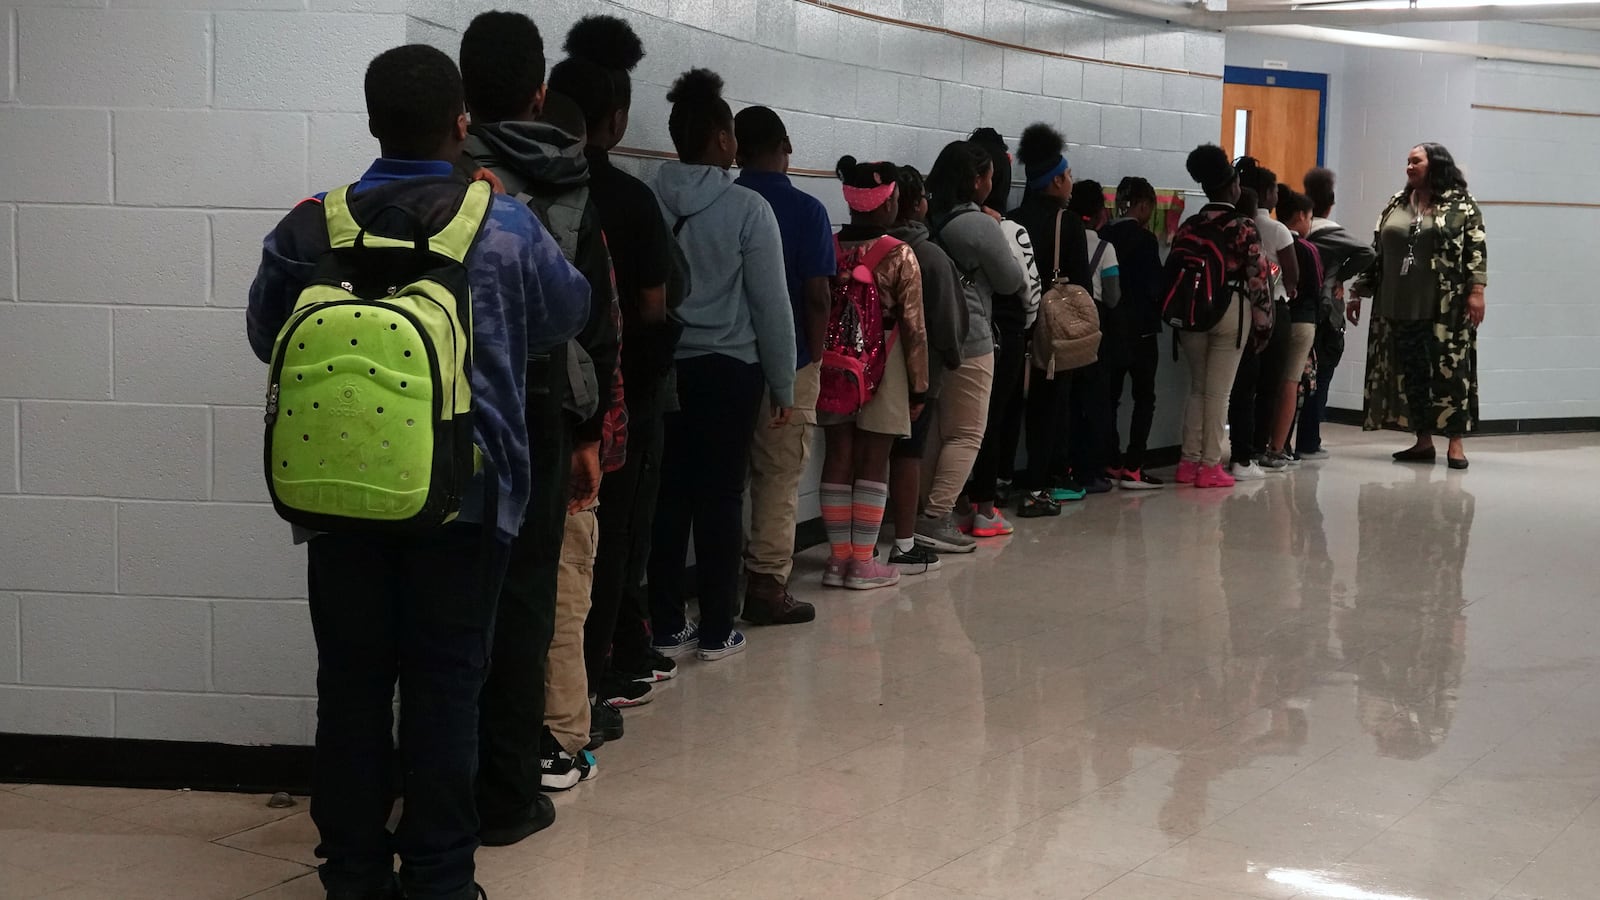 Students stand in line in a hallway outside a classroom door at Gardenview Elementary School in Memphis, Tennessee. —May, 2019—  Photo by Karen Pulfer Focht/Chalkbeat